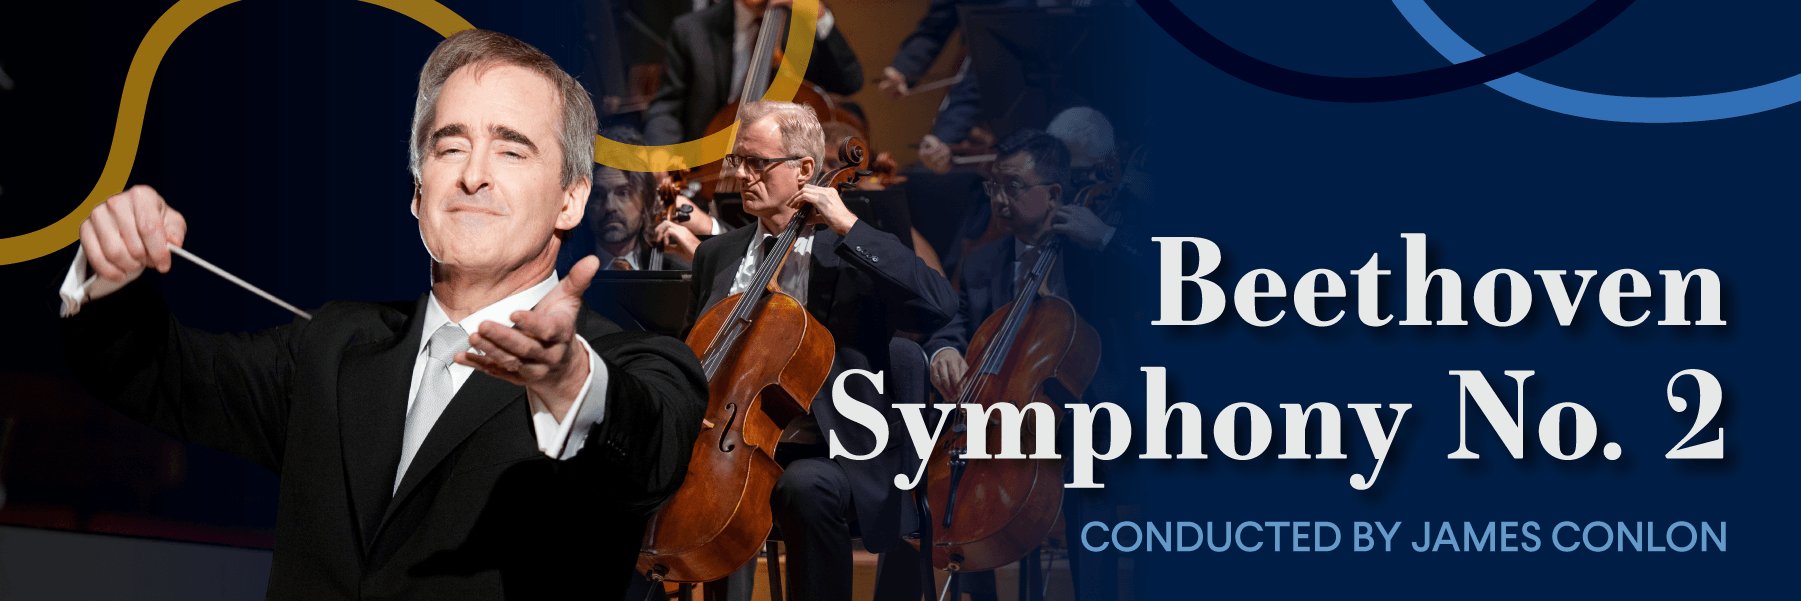 Featured image for “This Week at the BSO: Beethoven Symphony No. 2”